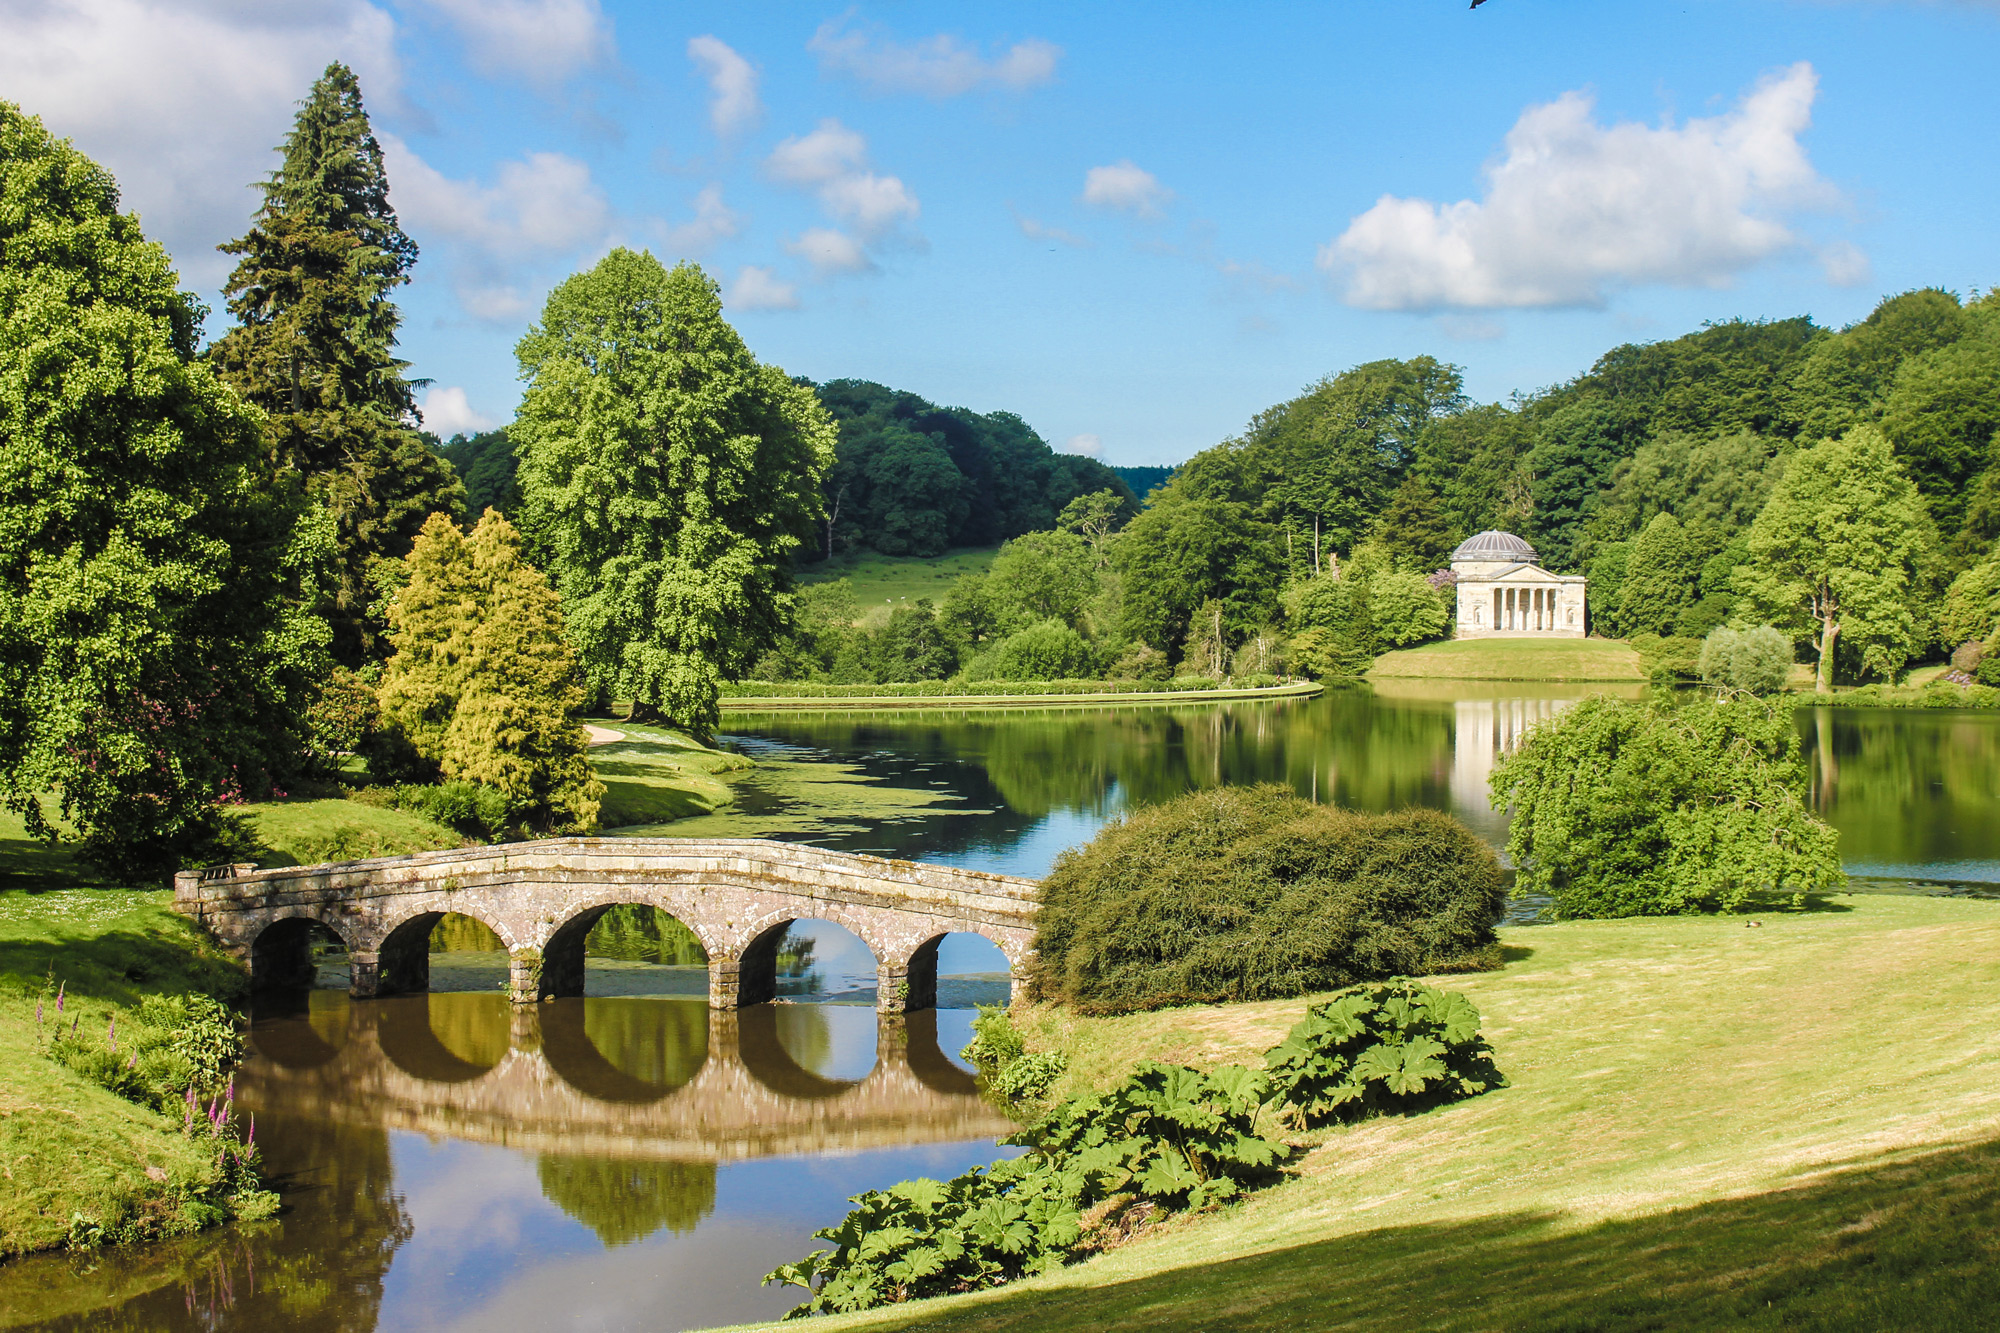 Stourhead National Trust property garden and lake in summer.